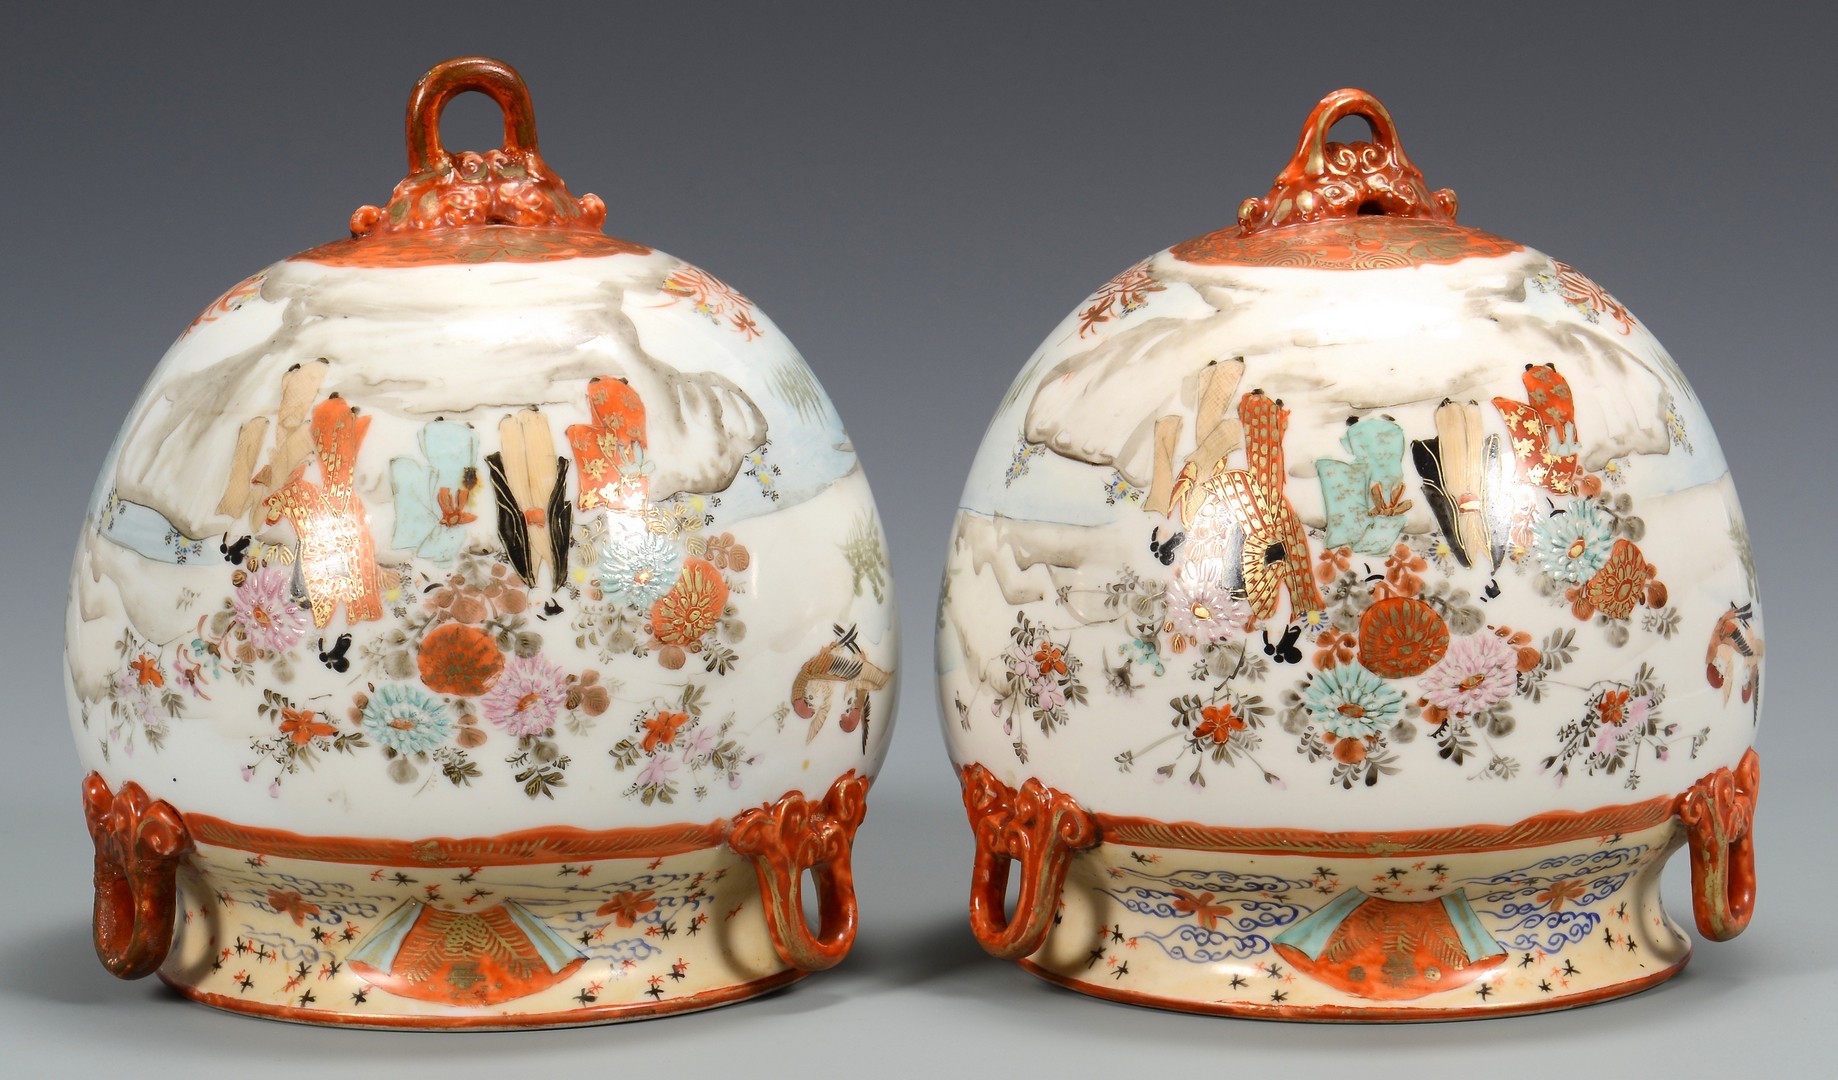 Lot 871: 4 Japanese items: 2 vases, 2 Ferners